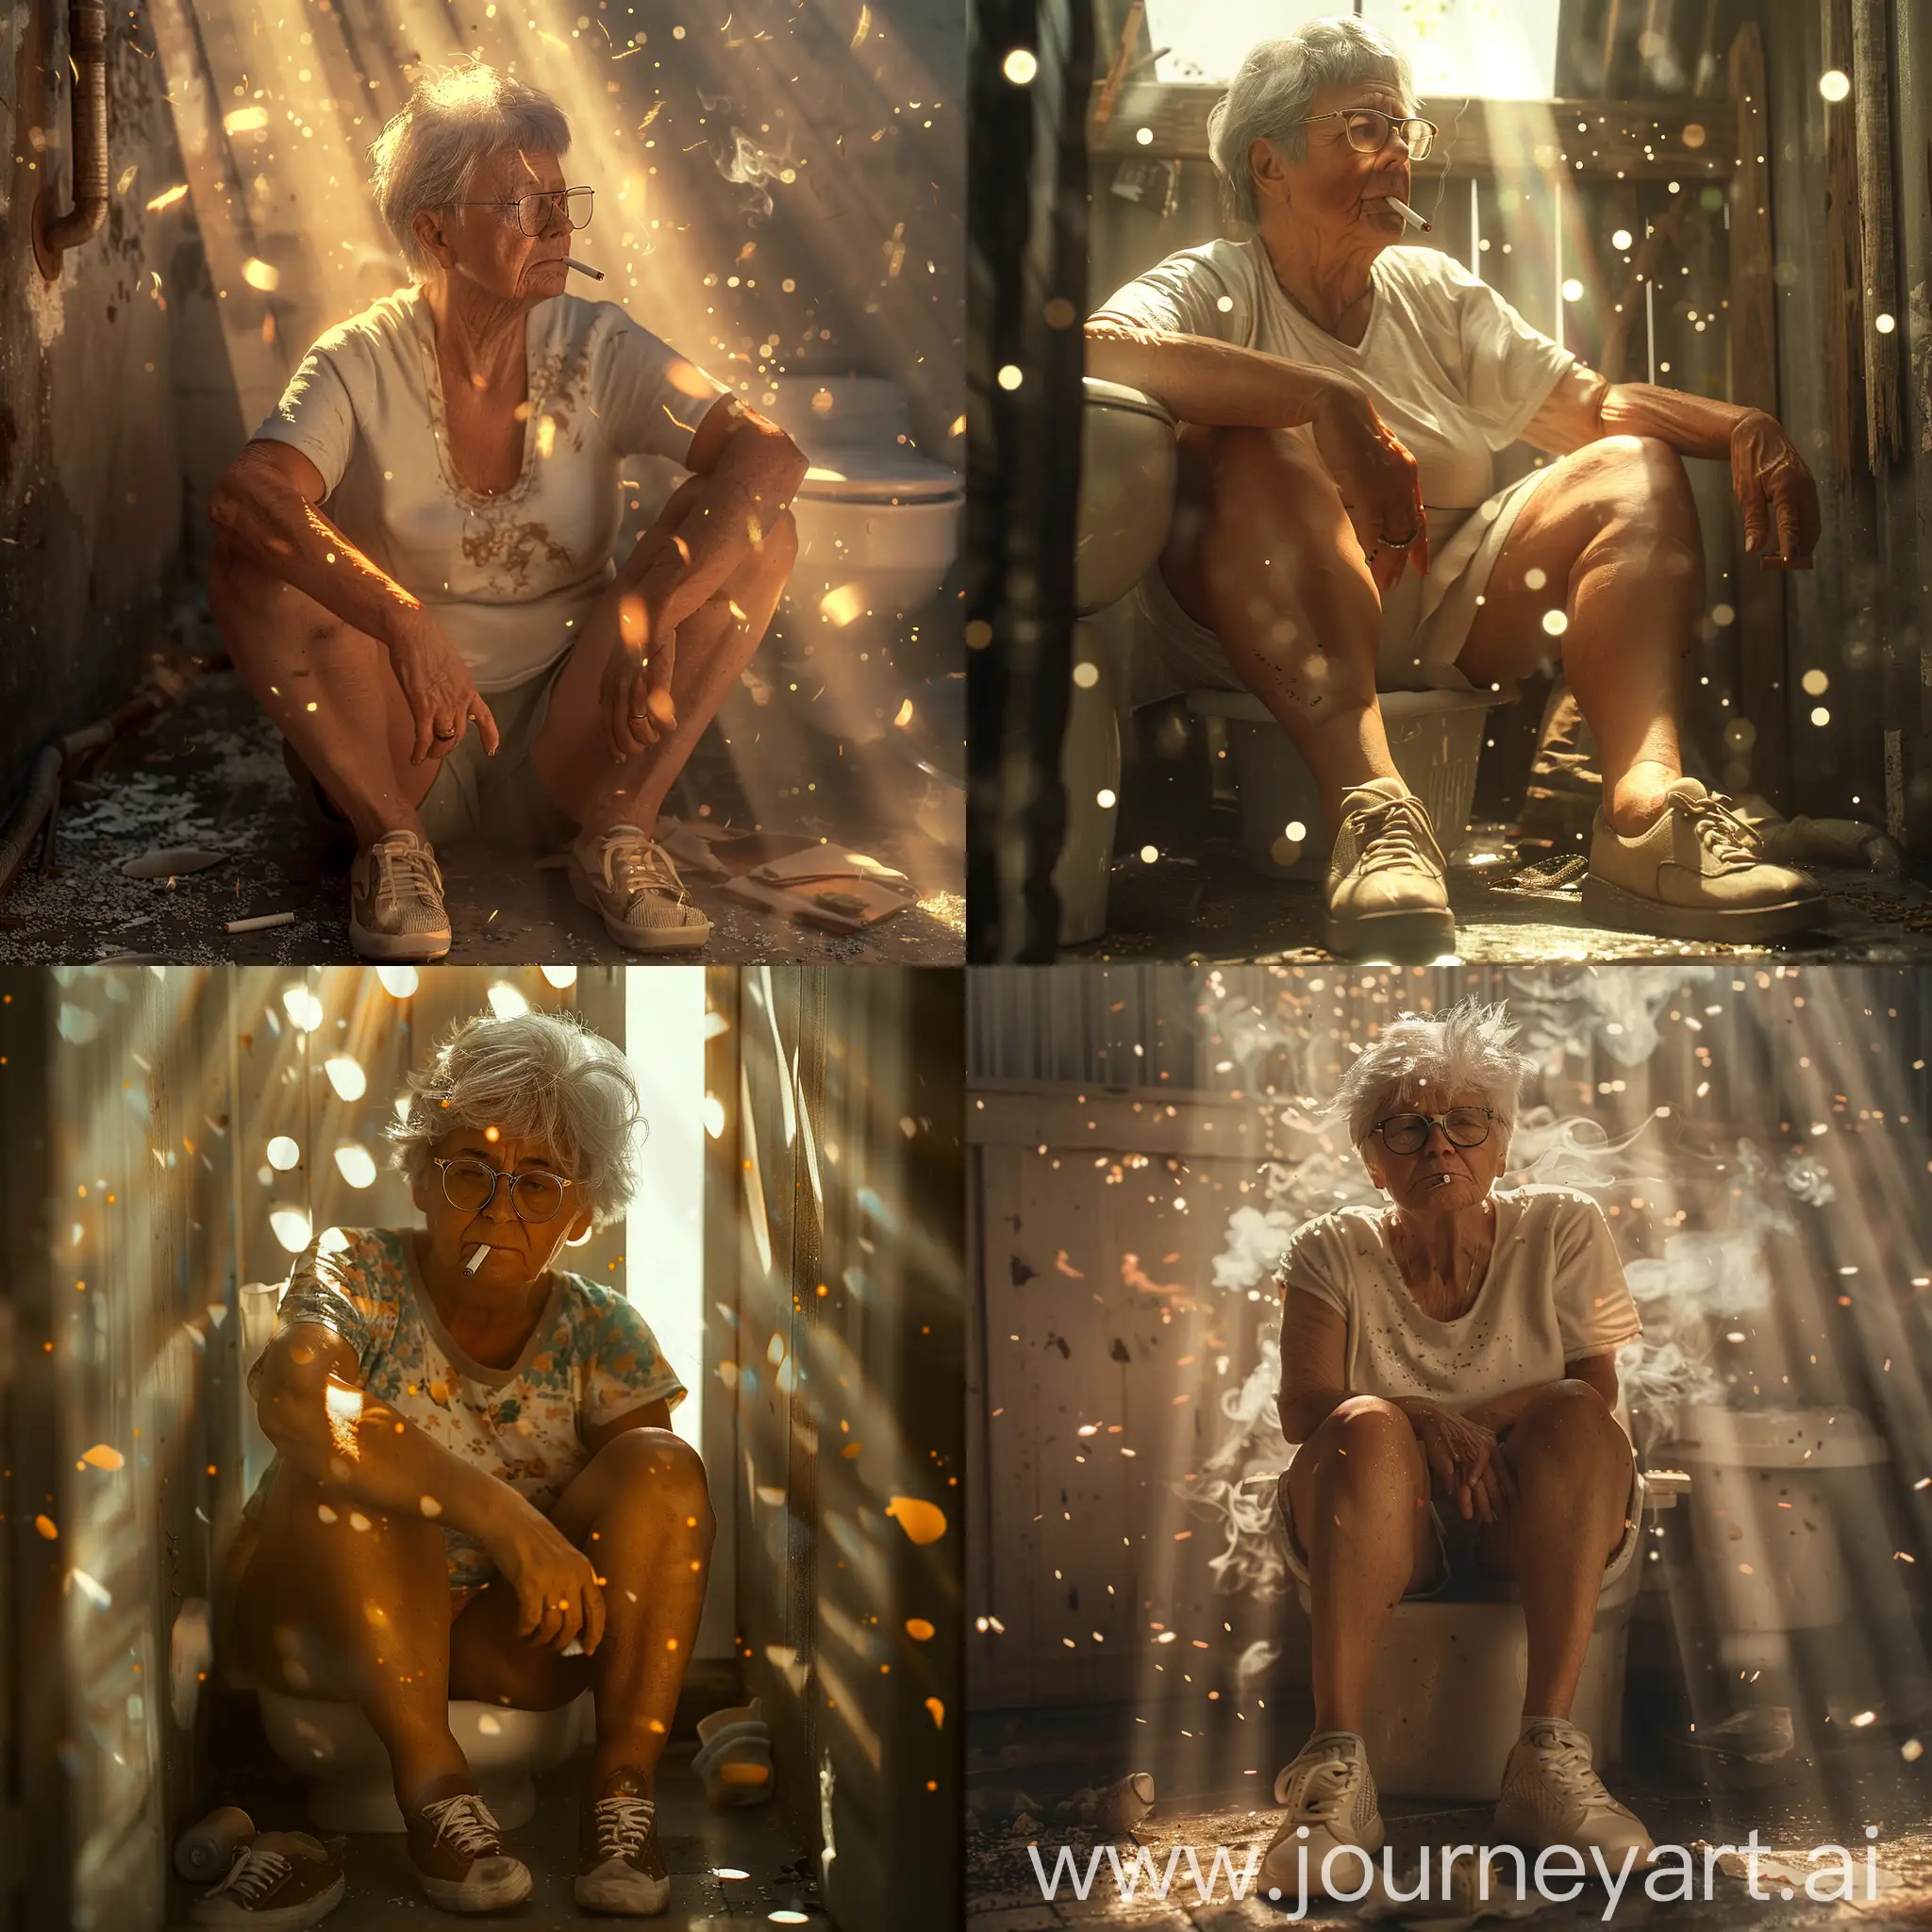 Retro 1970s frame, realism, high quality details. A shot from a real movie. A fat 50-year-old woman is sitting in a village toilet in close-up. Short gray hair. The sun's rays are falling everywhere, creating an interesting atmosphere, glasses, smoking a cigarette. Shoes and t-shirt